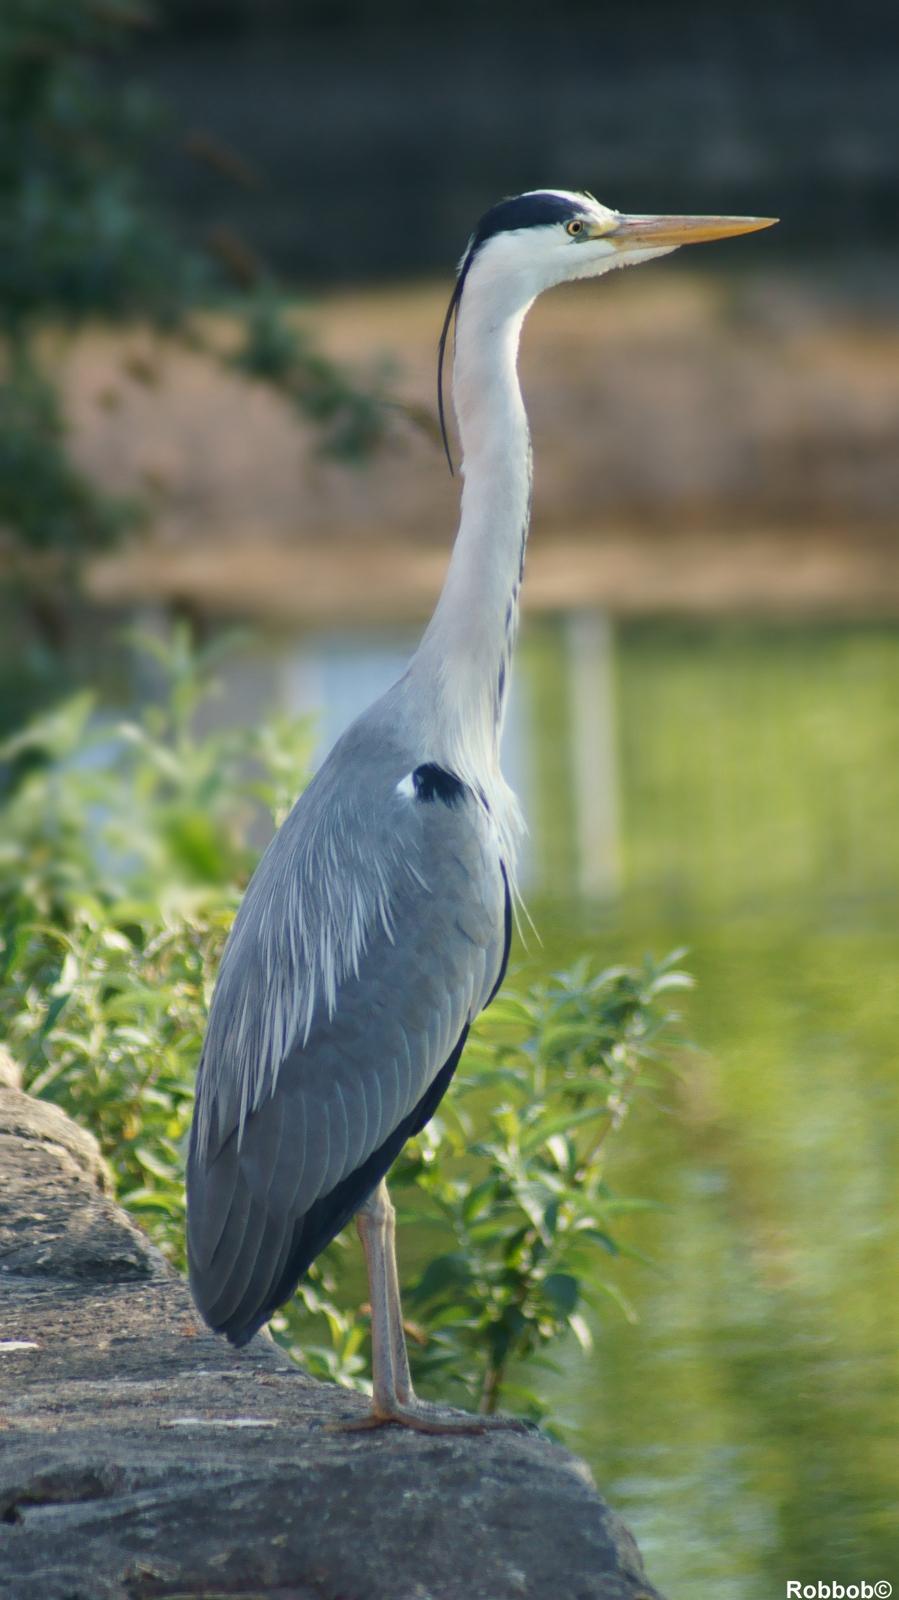 Regular Star contributor Robbob sent in this lovely picture of a grey heron at Pocket Nook, St Helens.